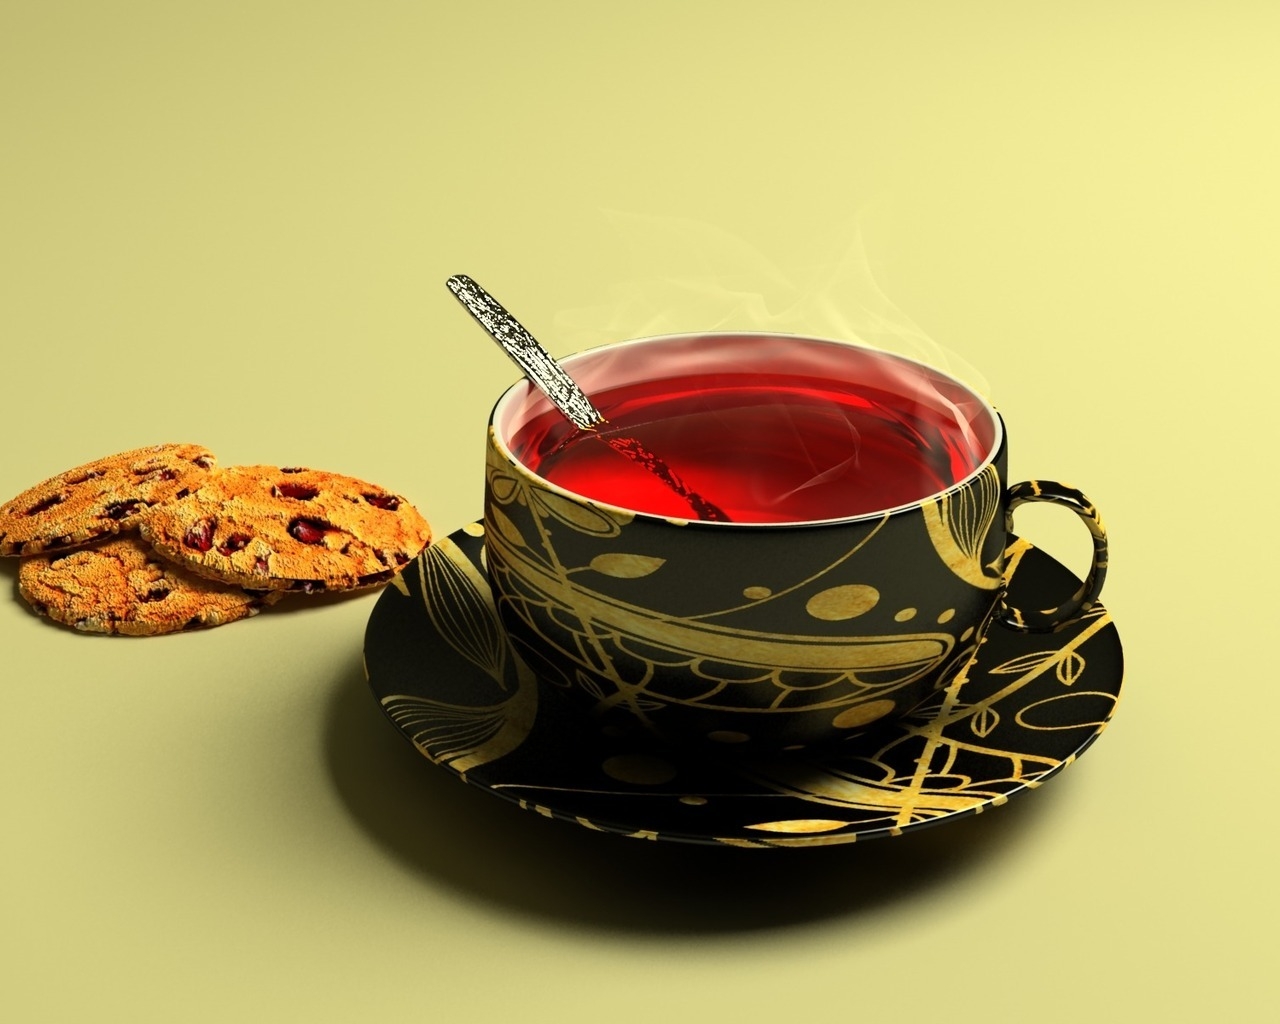 Cup of Tea for 1280 x 1024 resolution